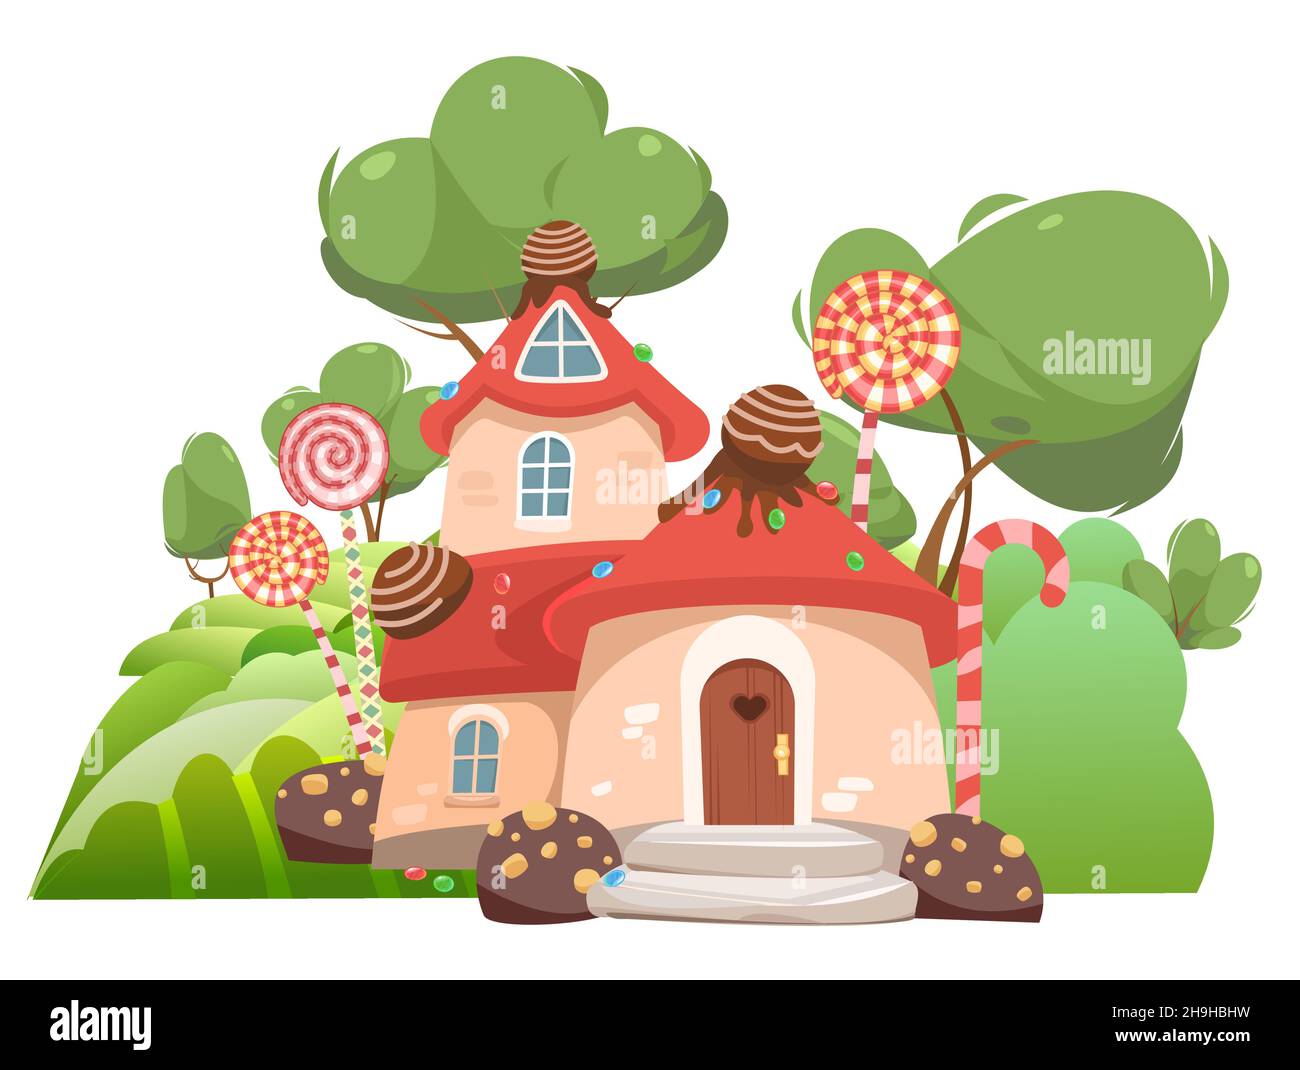 Fairy garden. Sweet caramel fairy house. Illustration in cartoon style flat design. Summer cute landscape. Picture for children isolated on white Stock Vector